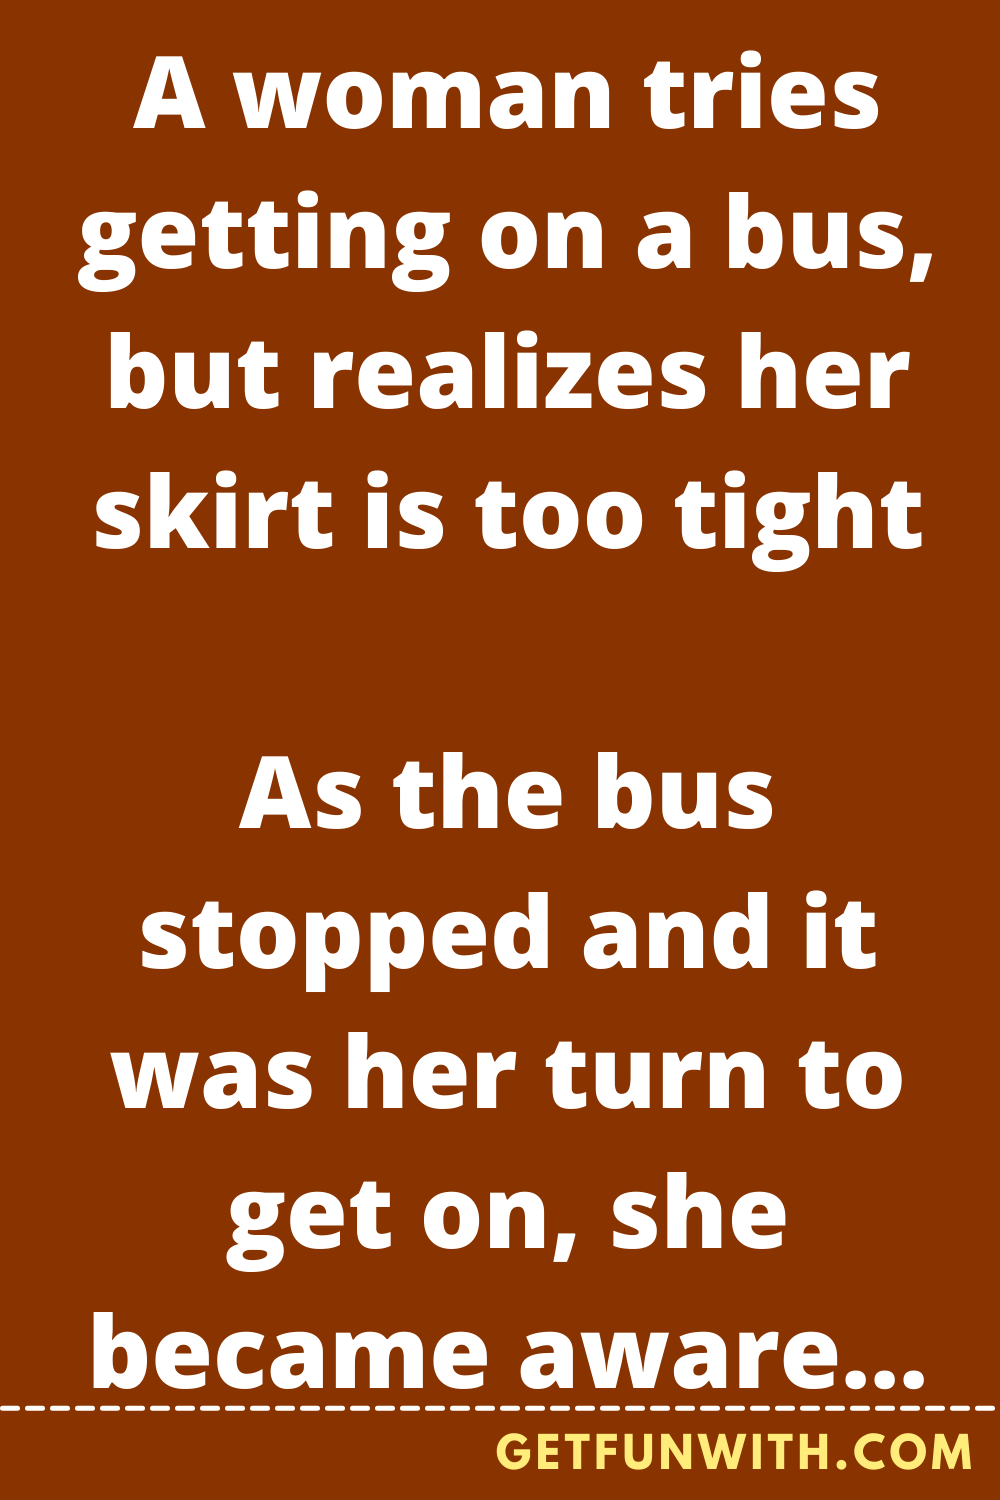 A woman tries getting on a bus, but realizes her skirt is too tight